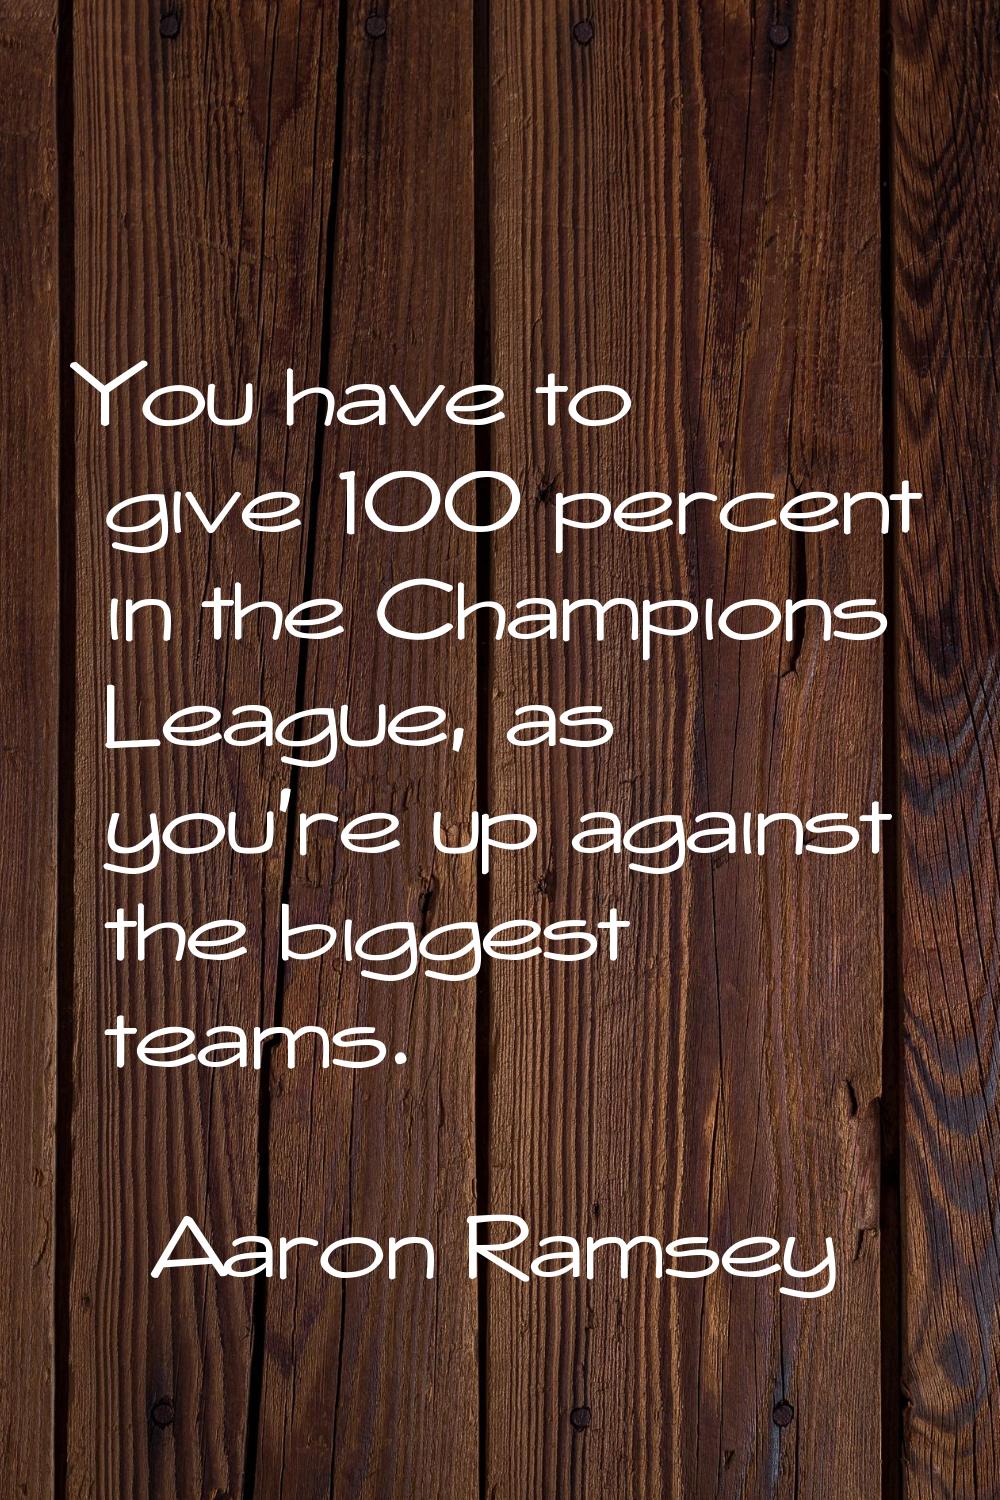 You have to give 100 percent in the Champions League, as you're up against the biggest teams.